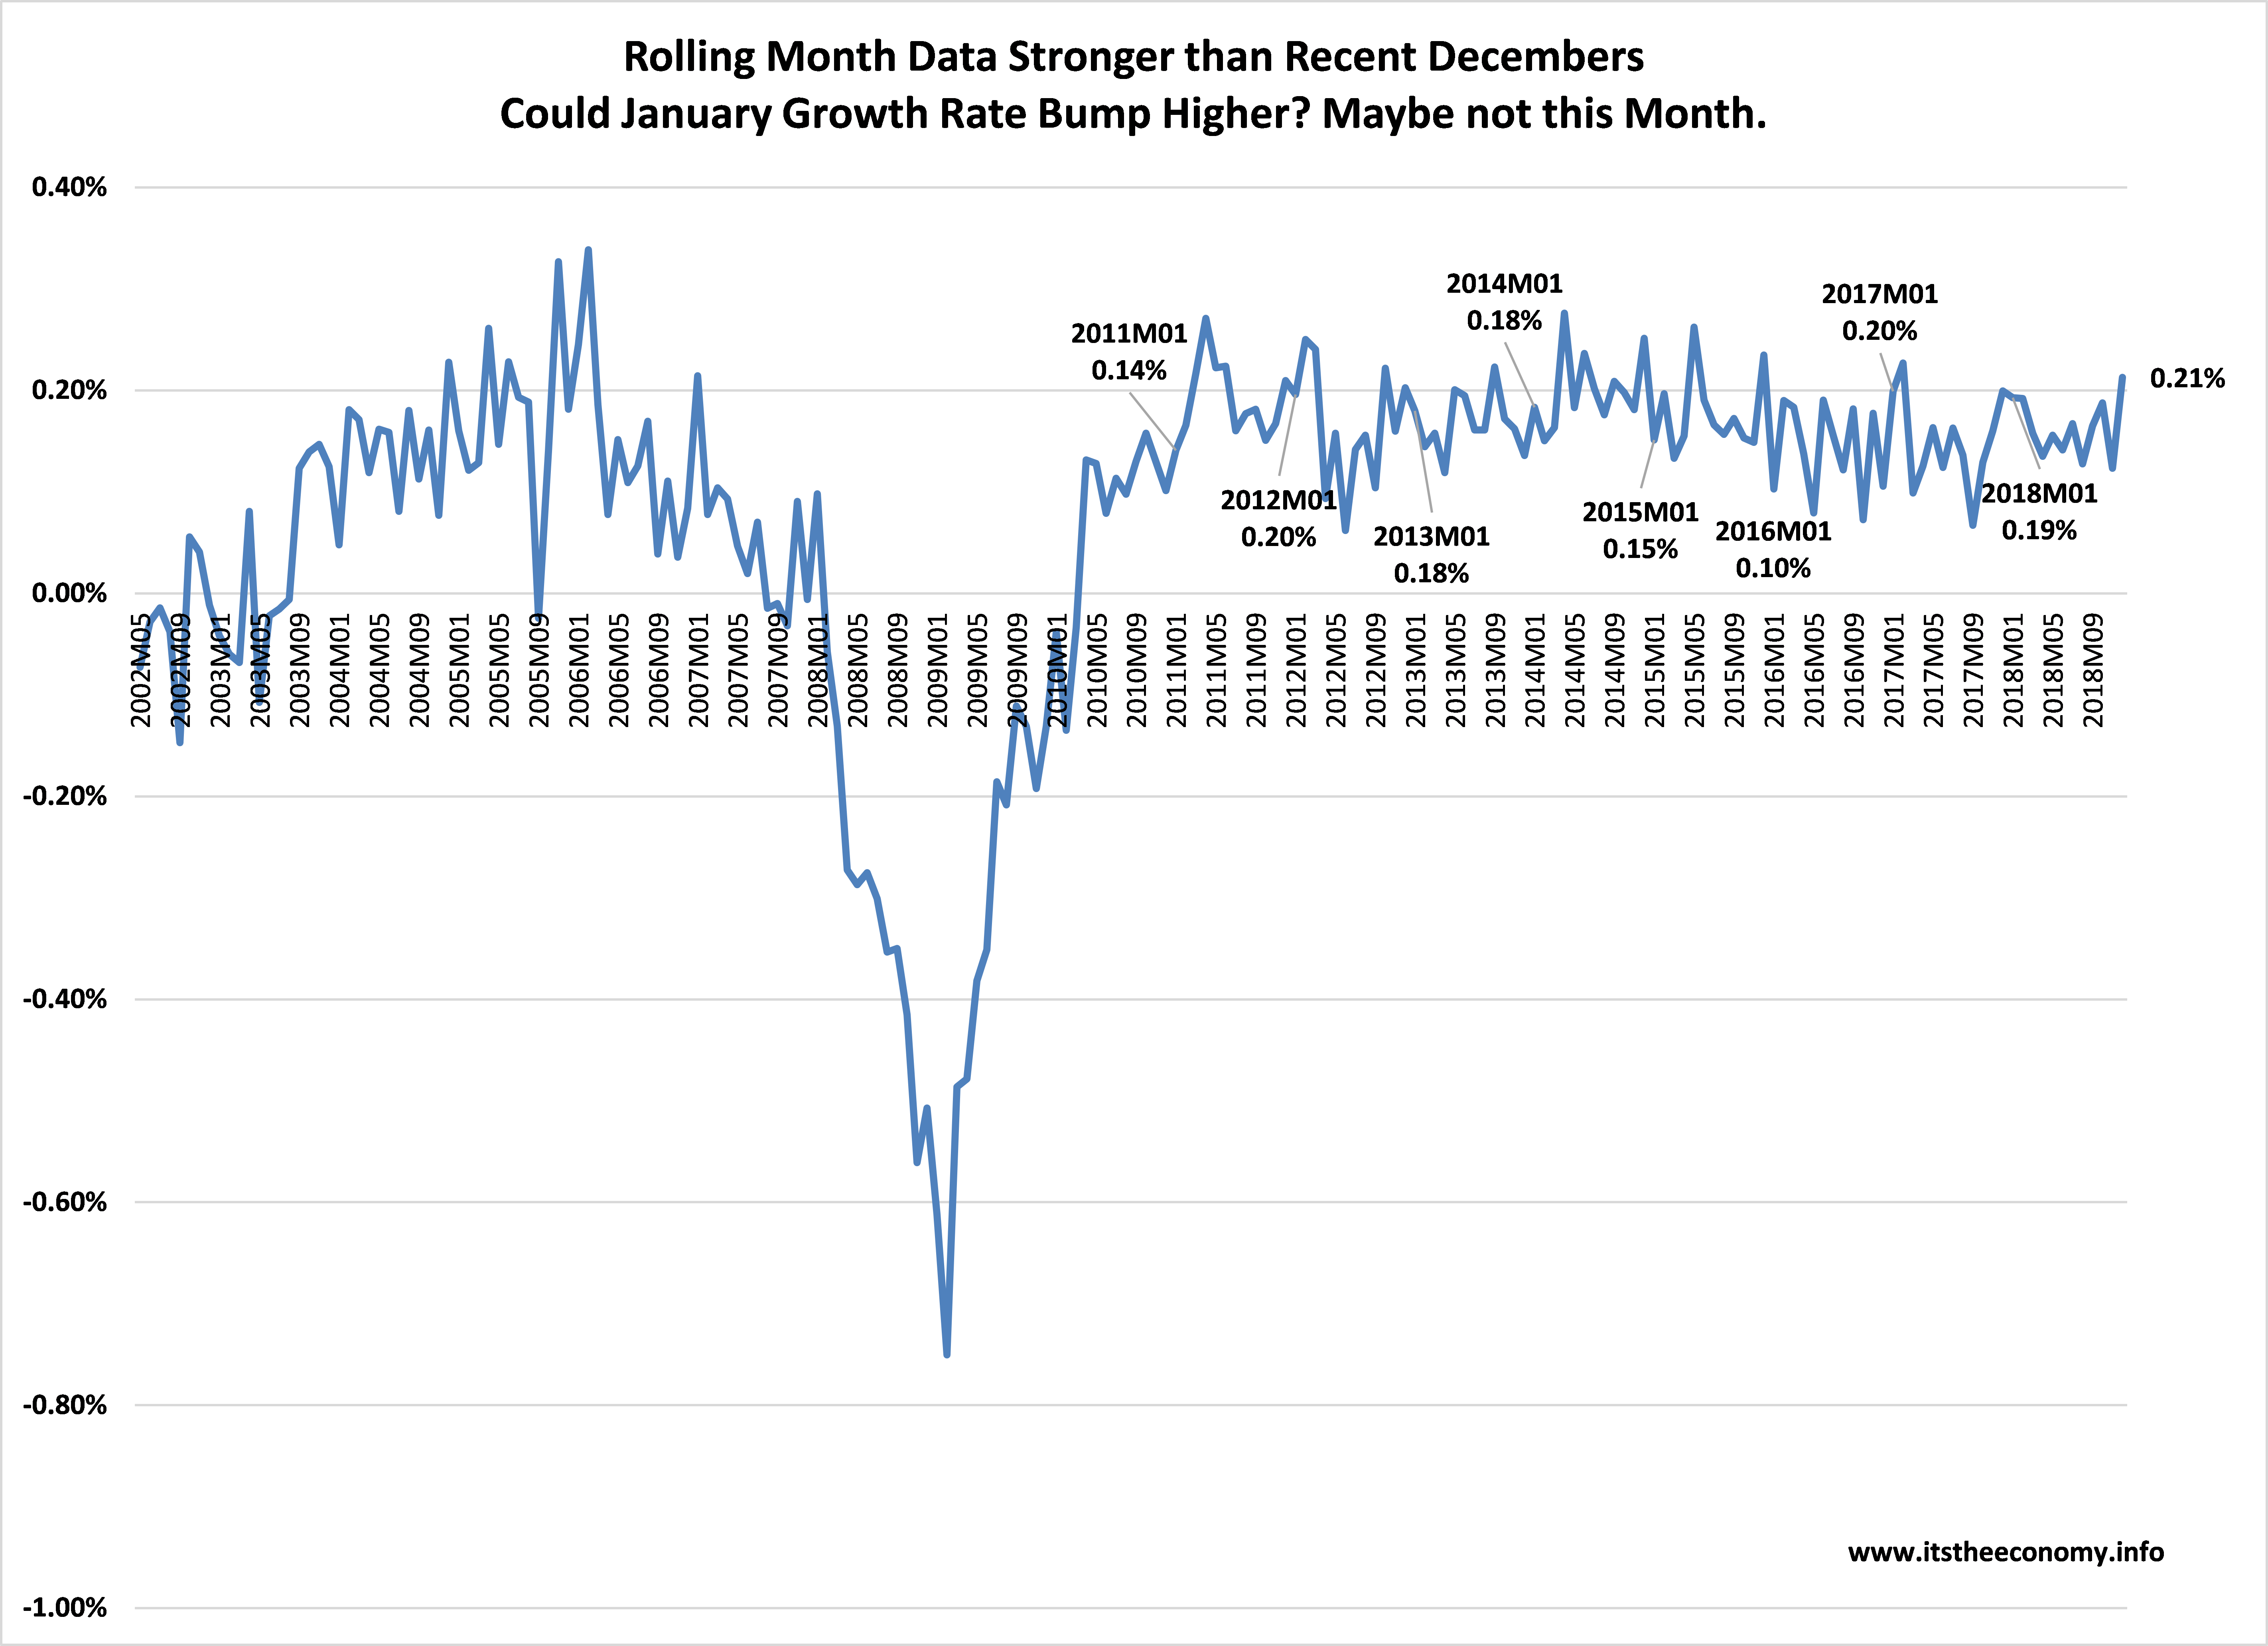 The rolling month data, growth from month to month, is similar to the rolling year graphic except the month to month changes are jagged rather than smooth, and they have a narrower range of values between 0.14% and 0.21%.